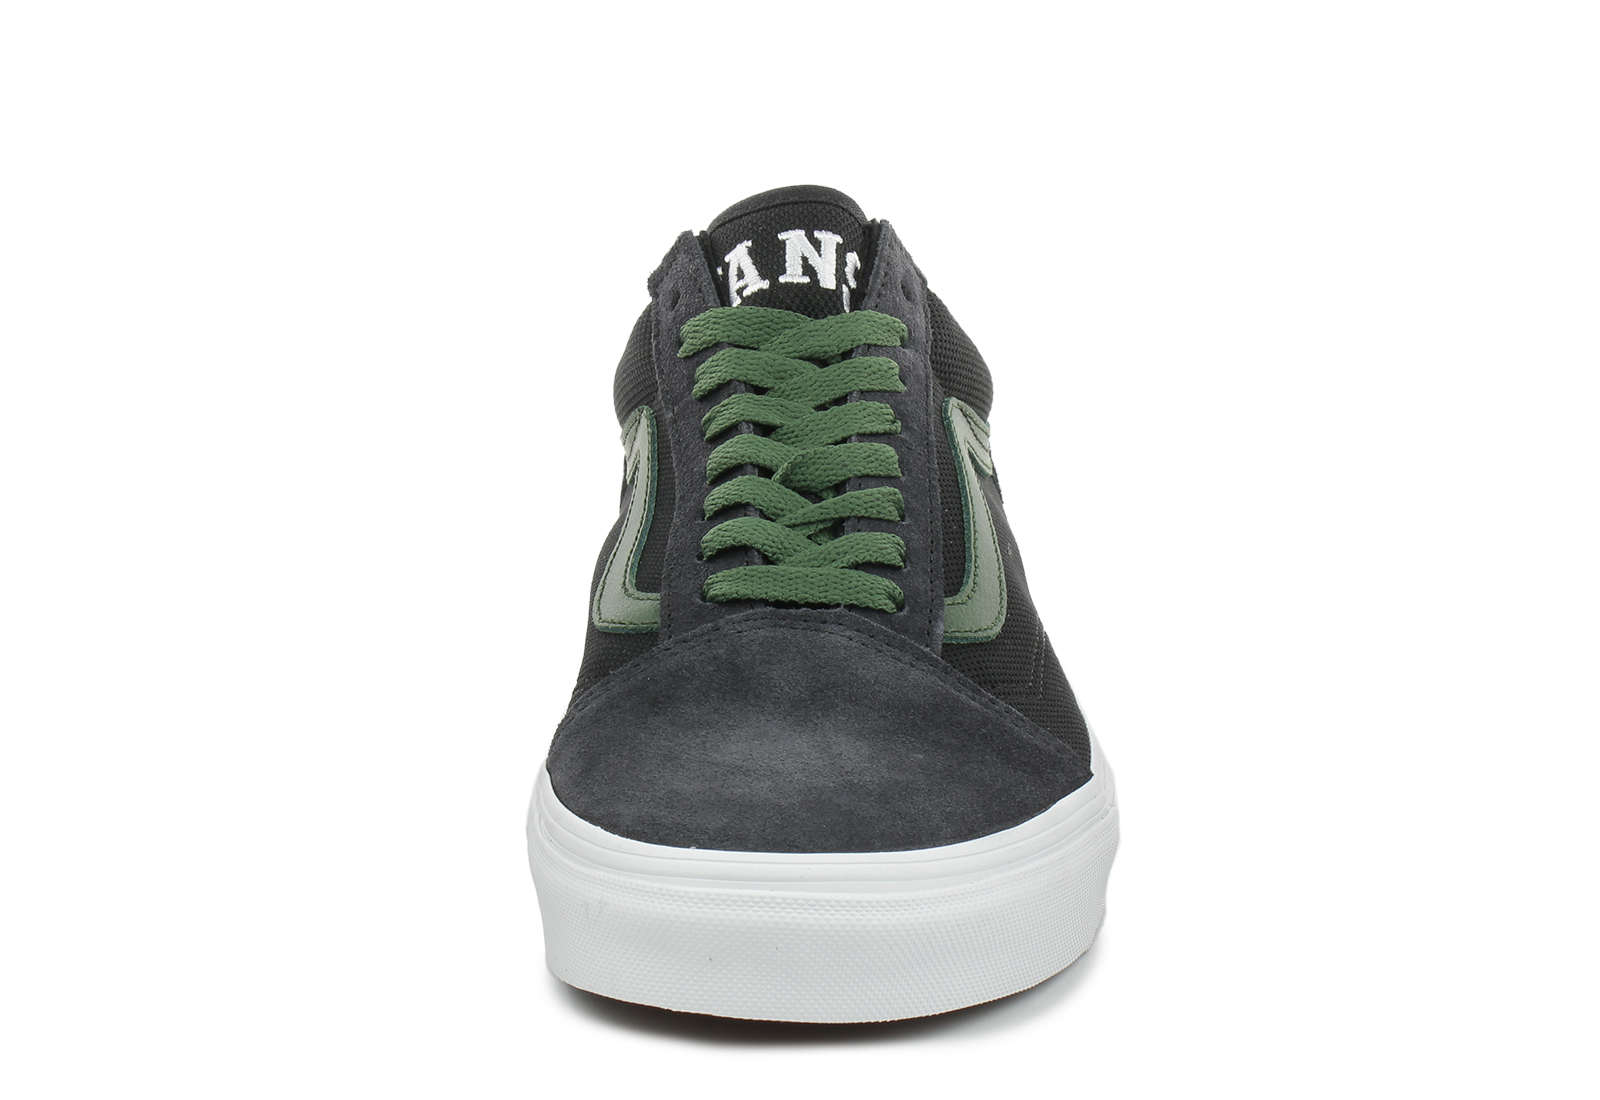 Vans Trainers - Old Skool - V005UFY4C - Online shop for sneakers, shoes and  boots